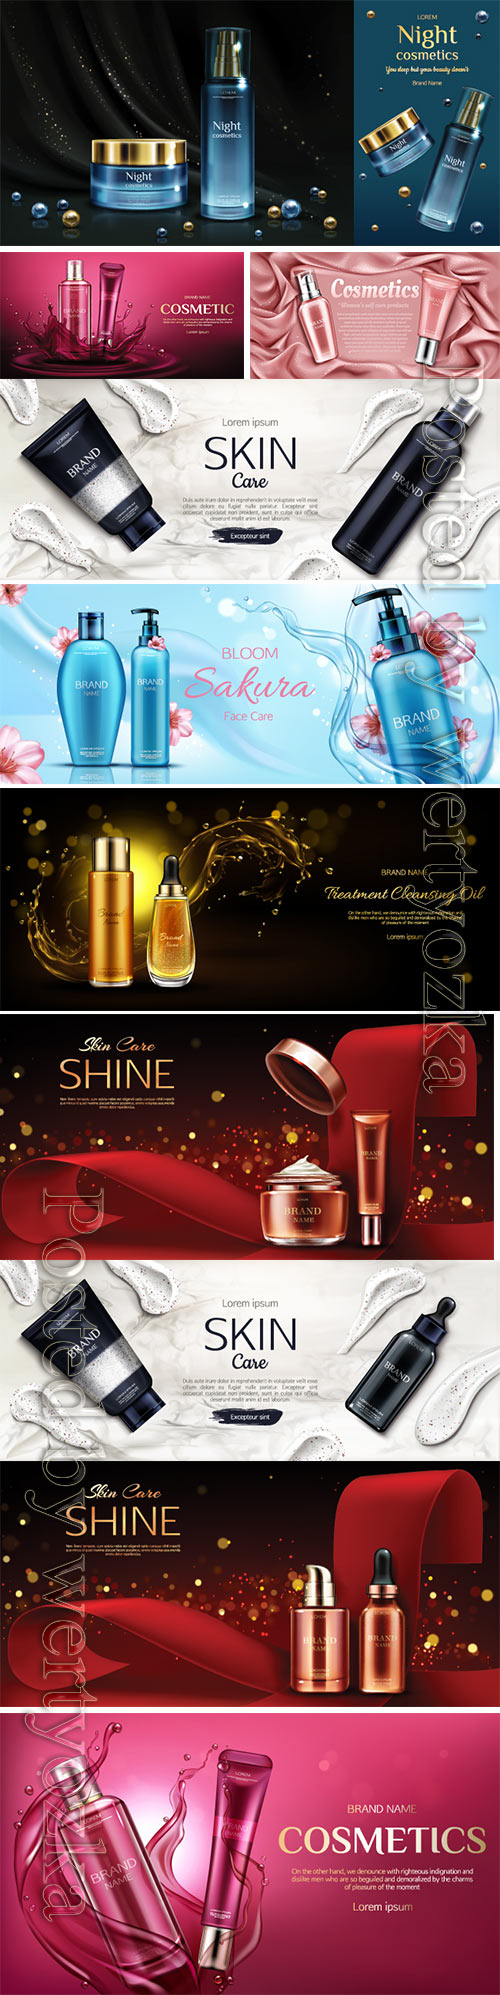 Cosmetic beauty ads flyer vector illustration